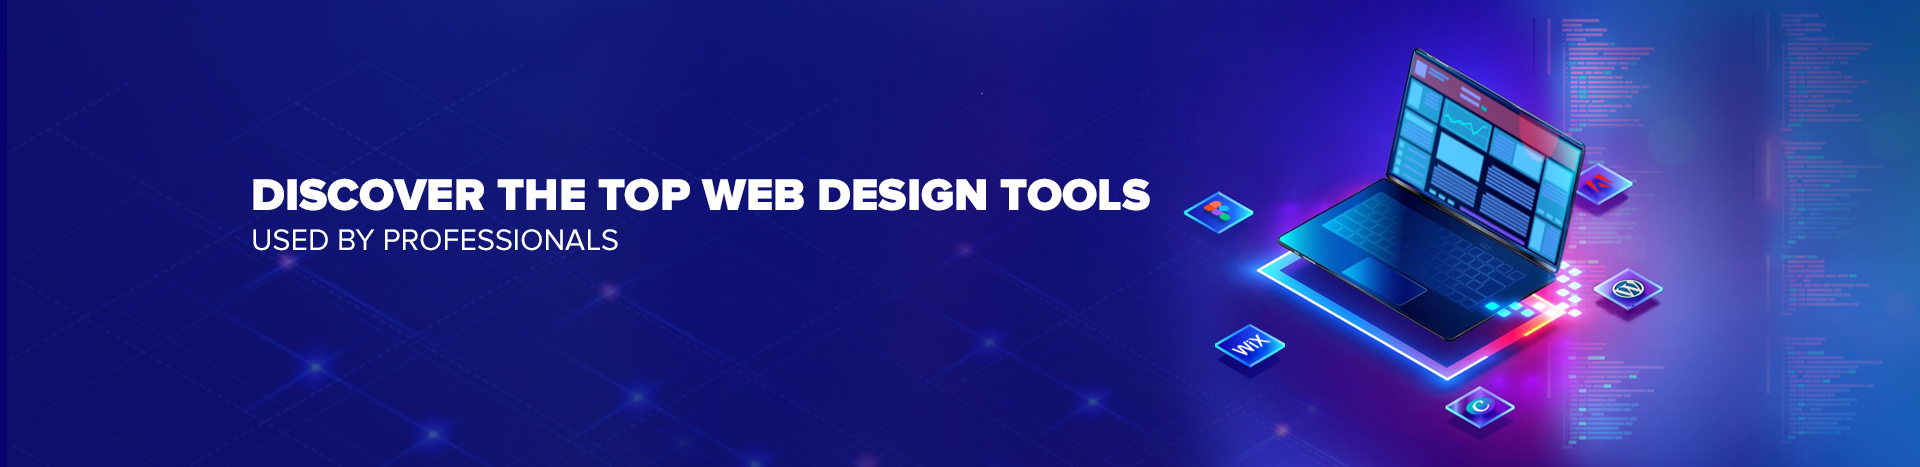 Discover the Top Web Design Tools Used by Professionals